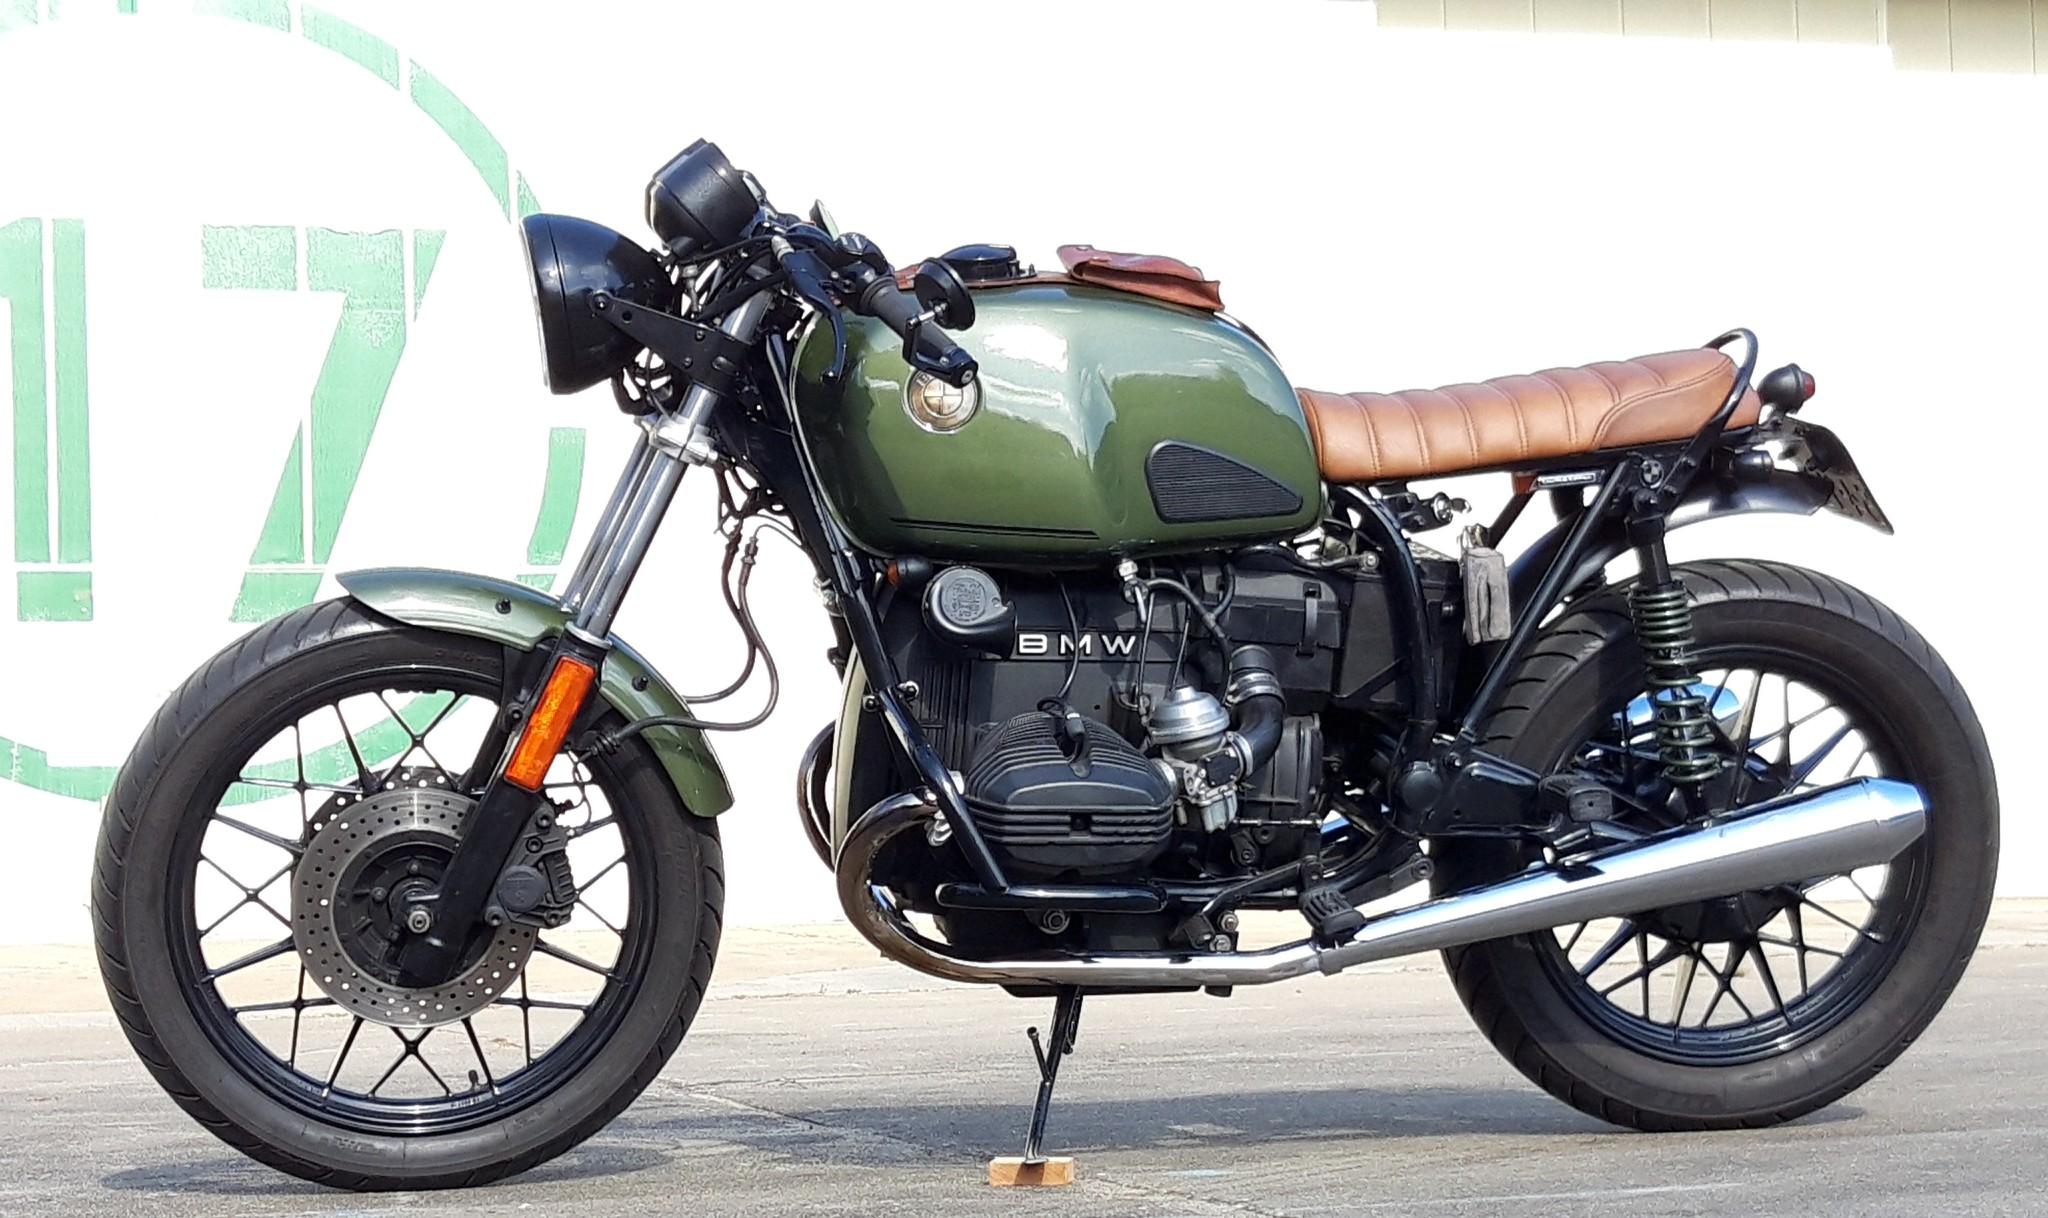 BMW R100 Cafe Racer - The story behind the bike - CafeRacerWebshop.com